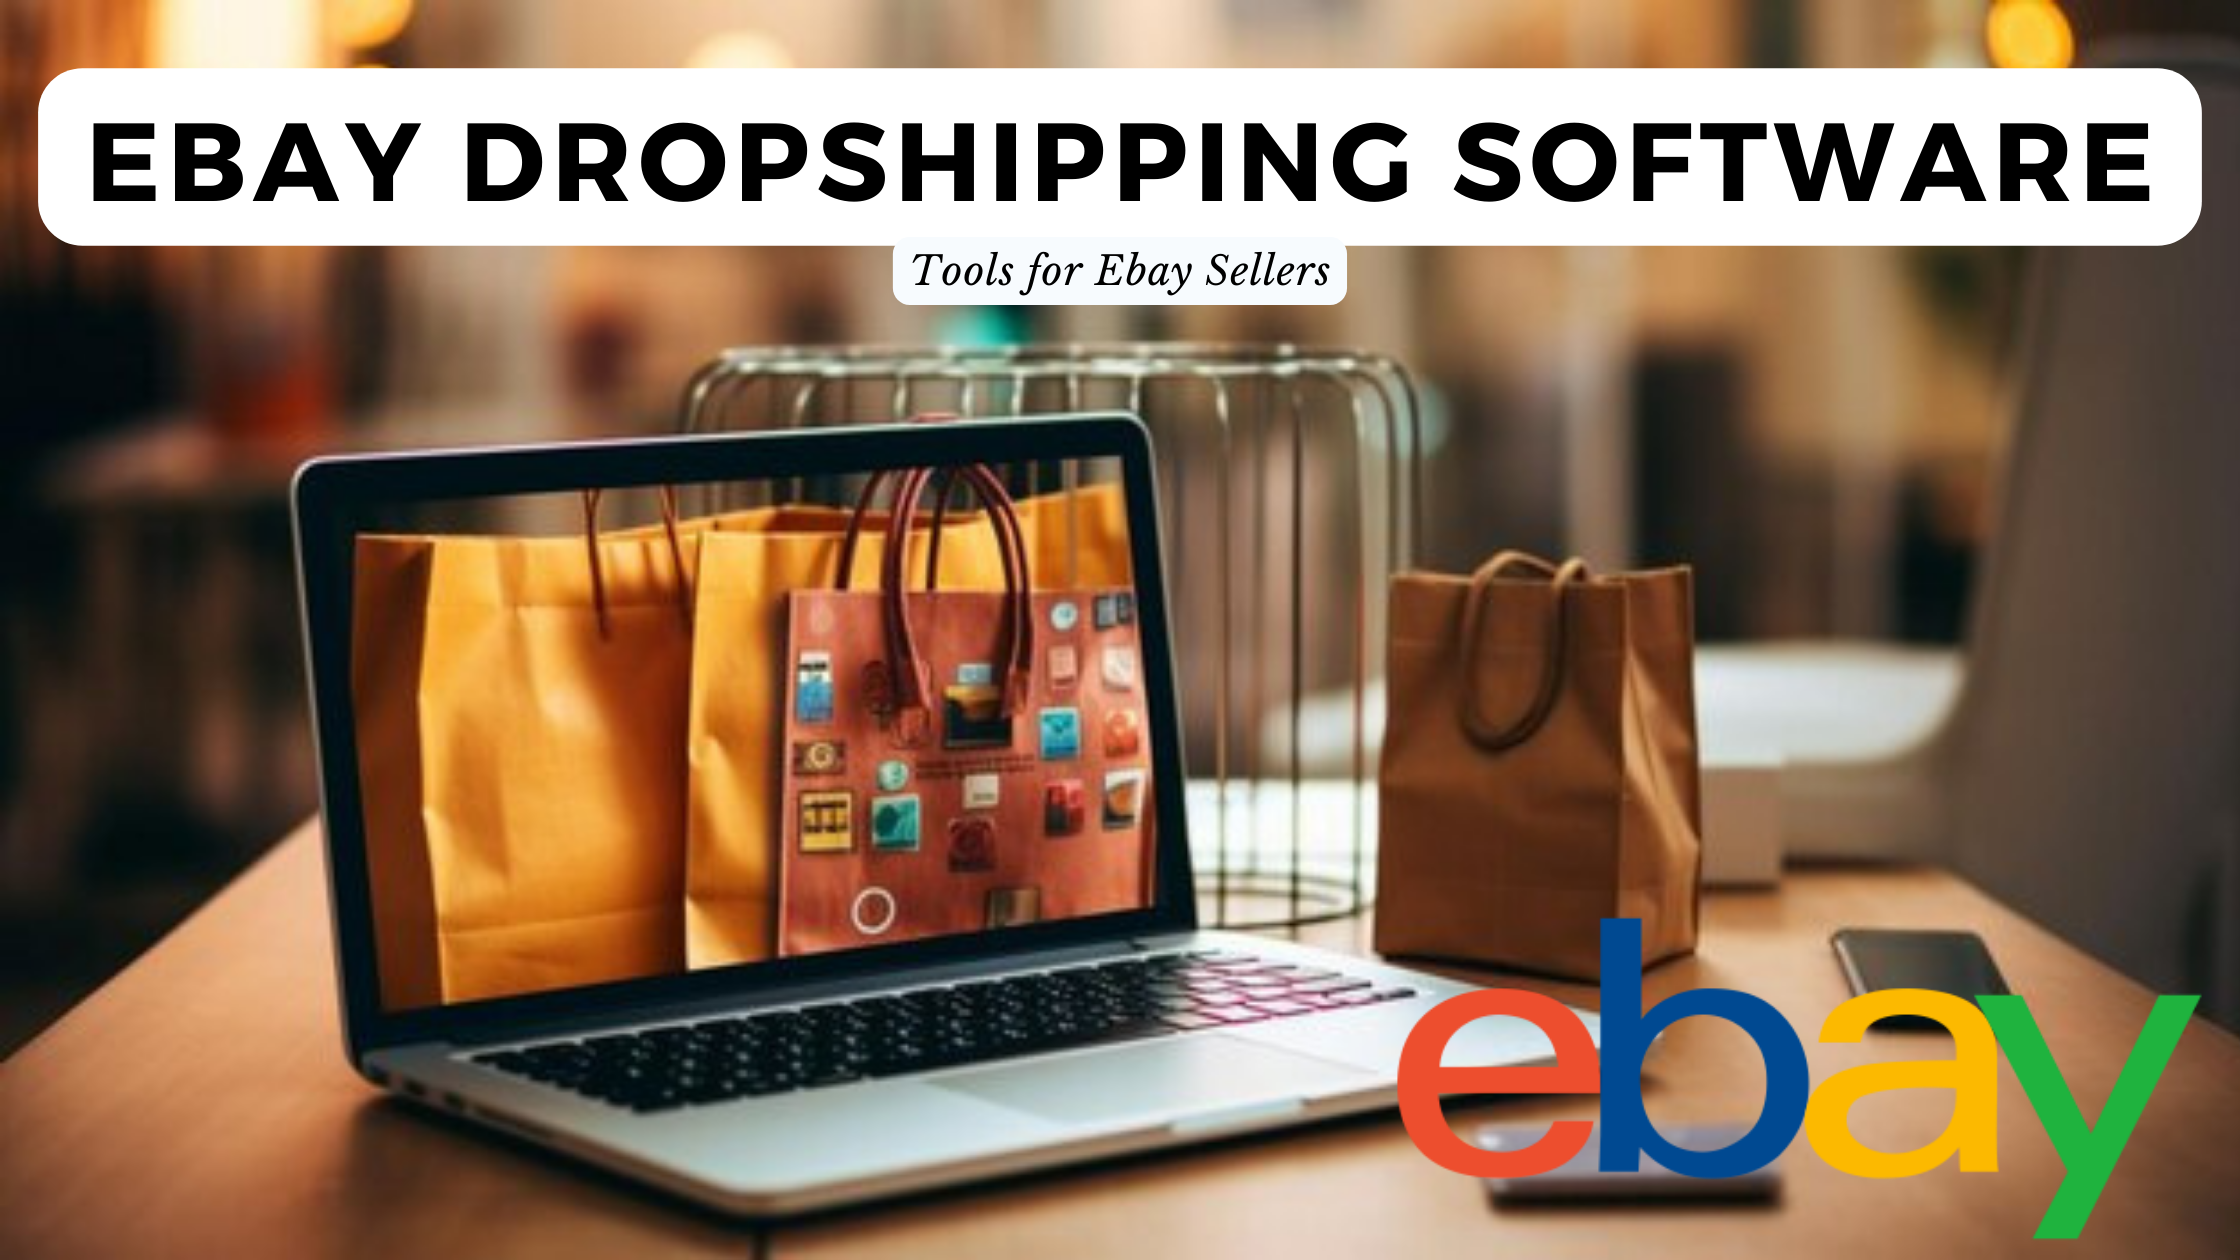 https://subscribed.fyi/wp-content/uploads/2023/12/Ebay-Dropshipping-Software_-Tools-for-Ebay-Sellers.png